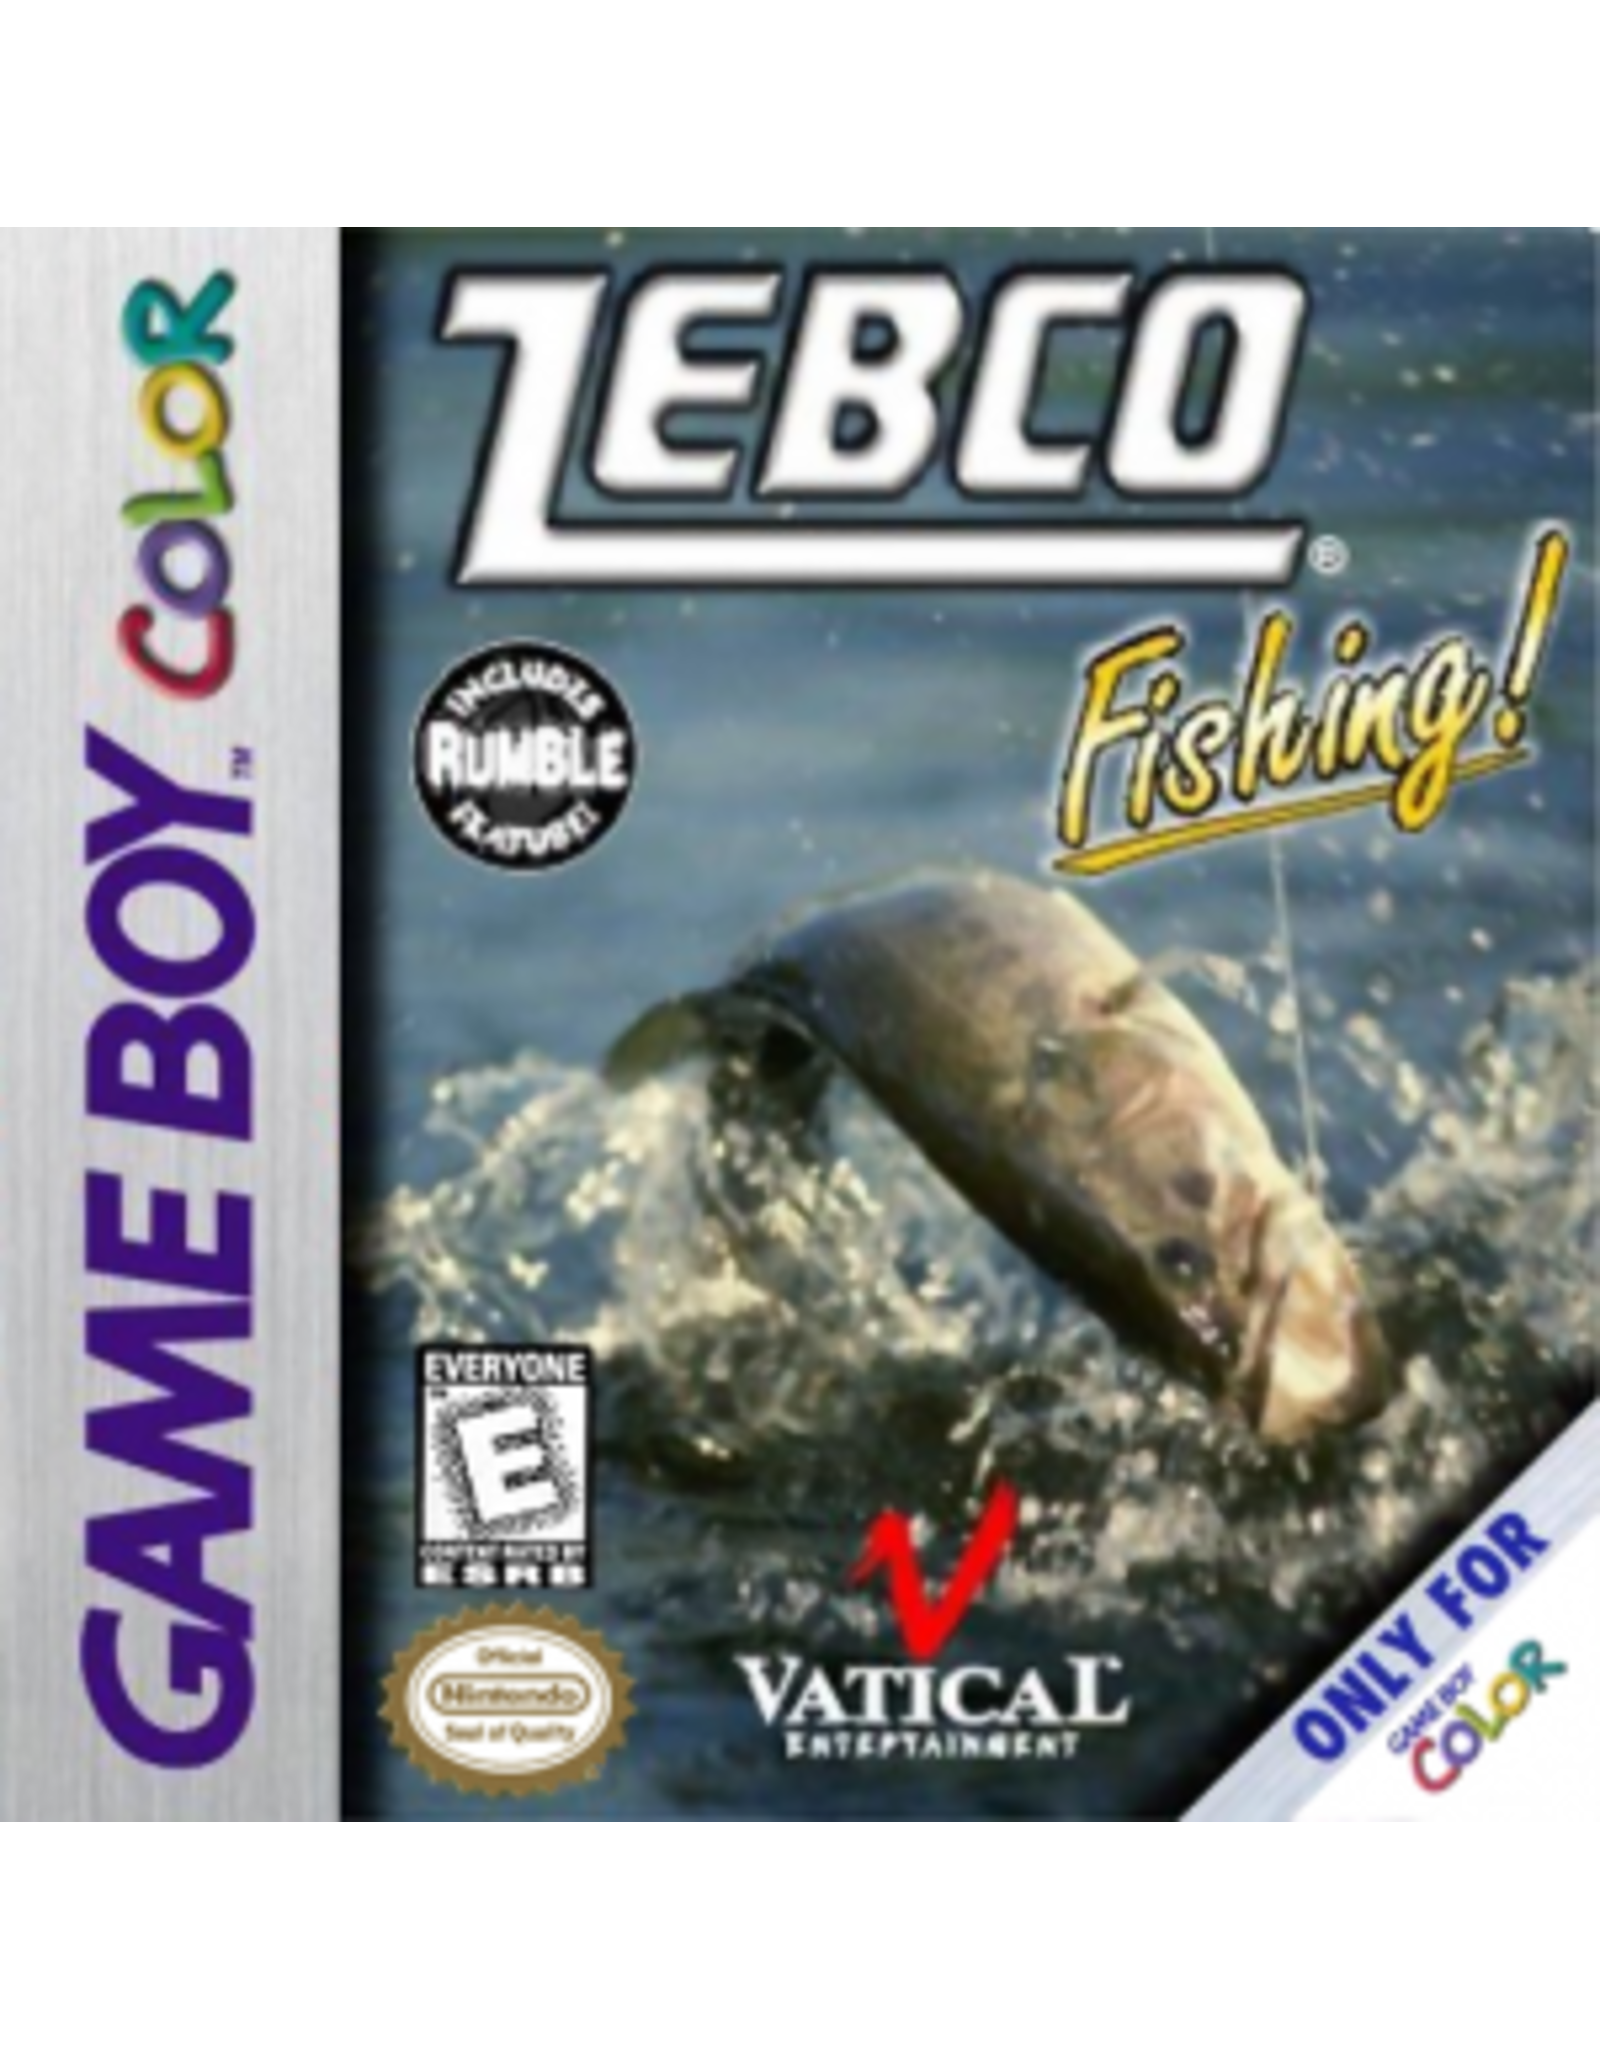 Game Boy Color Zebco Fishing (Cart Only)